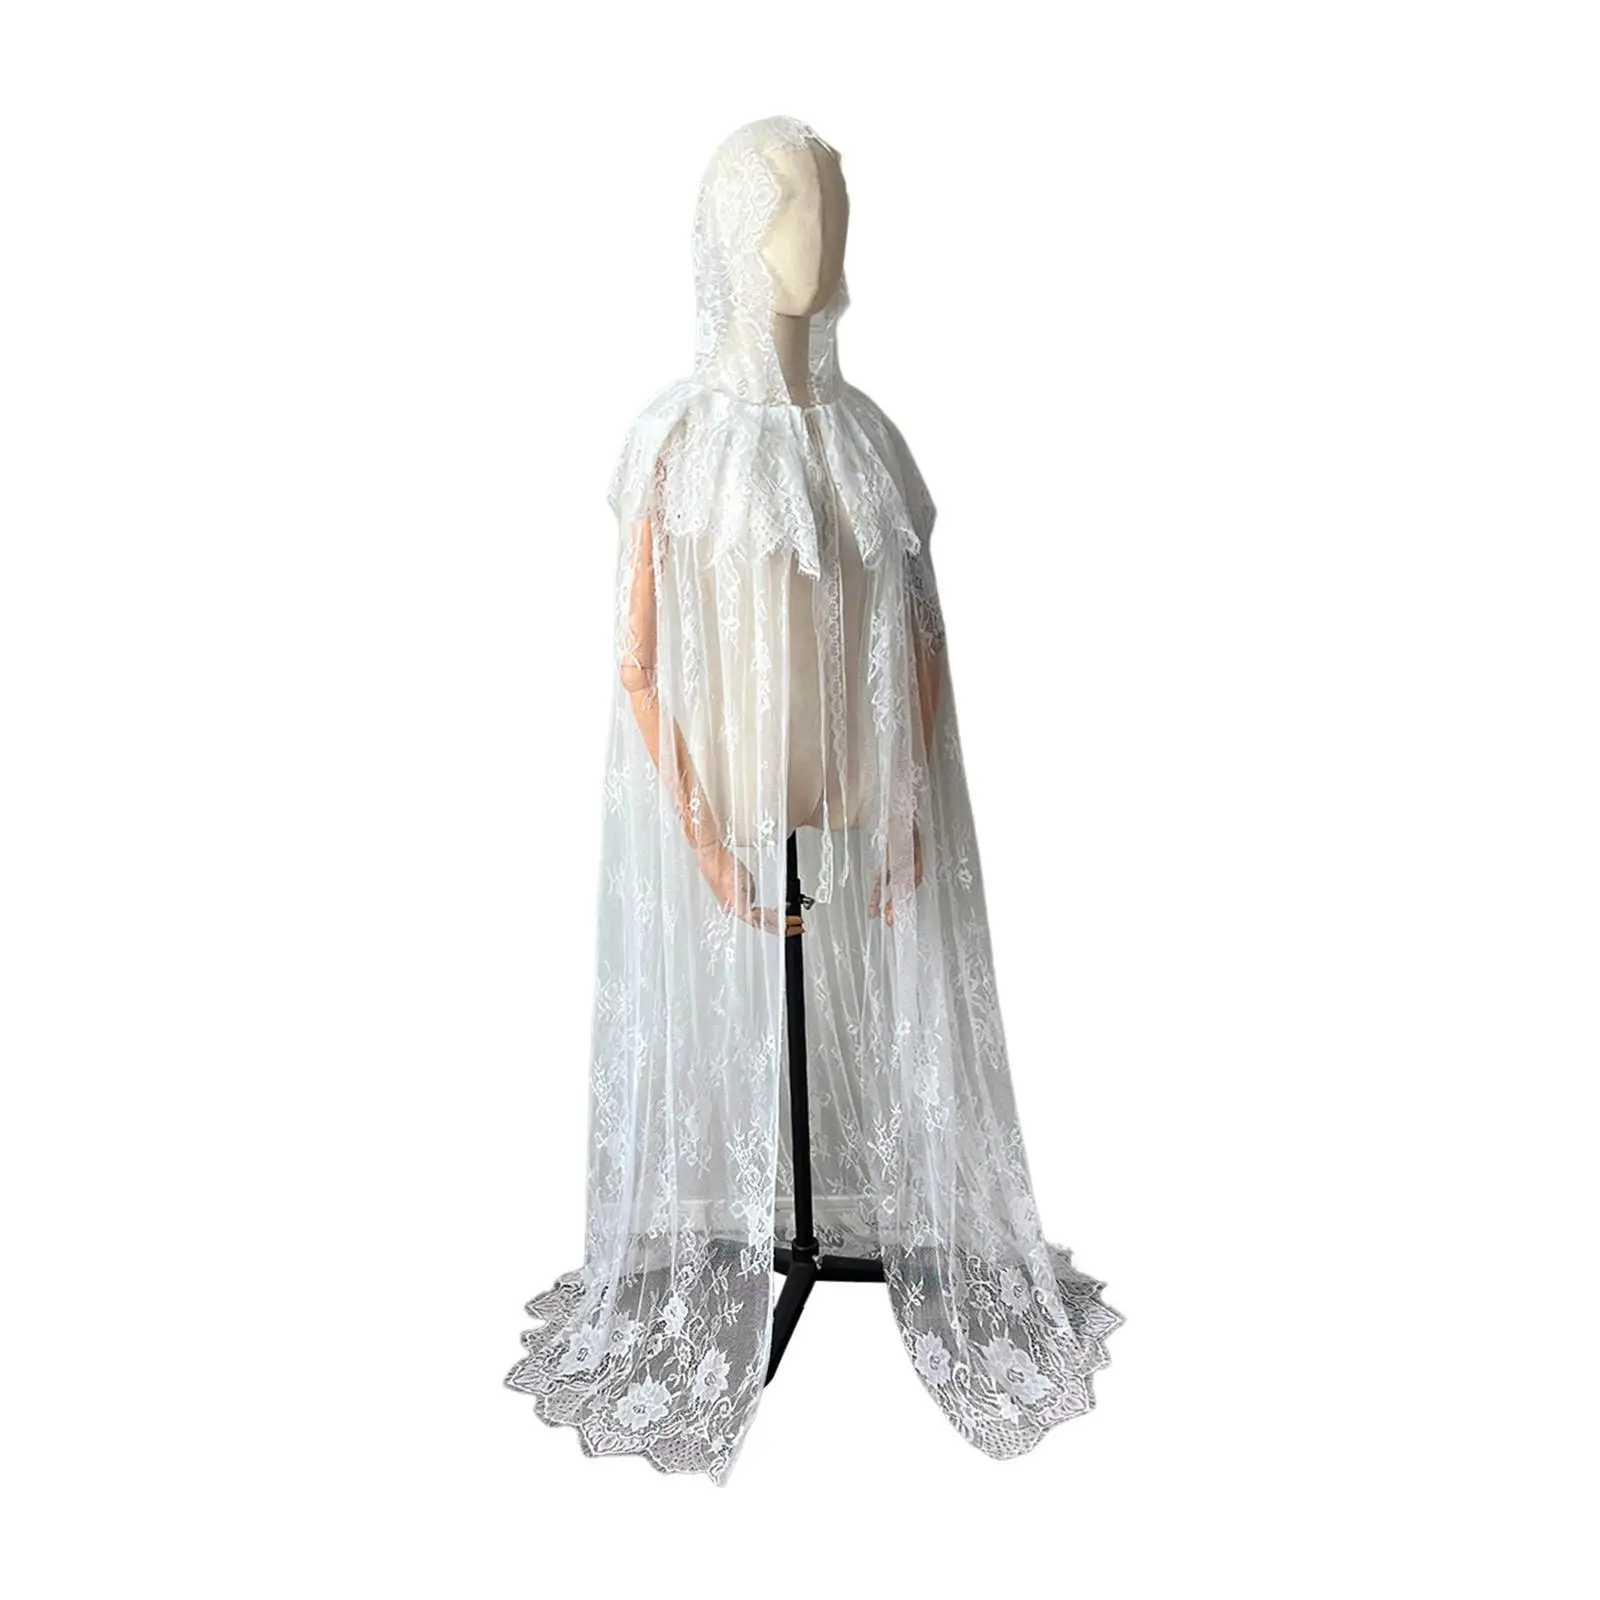 Hooded Cloak Long Cape Halloween Costume Accessory Wedding Bridal Cloak for Evening Party Stage Performances Masquerade Birthday